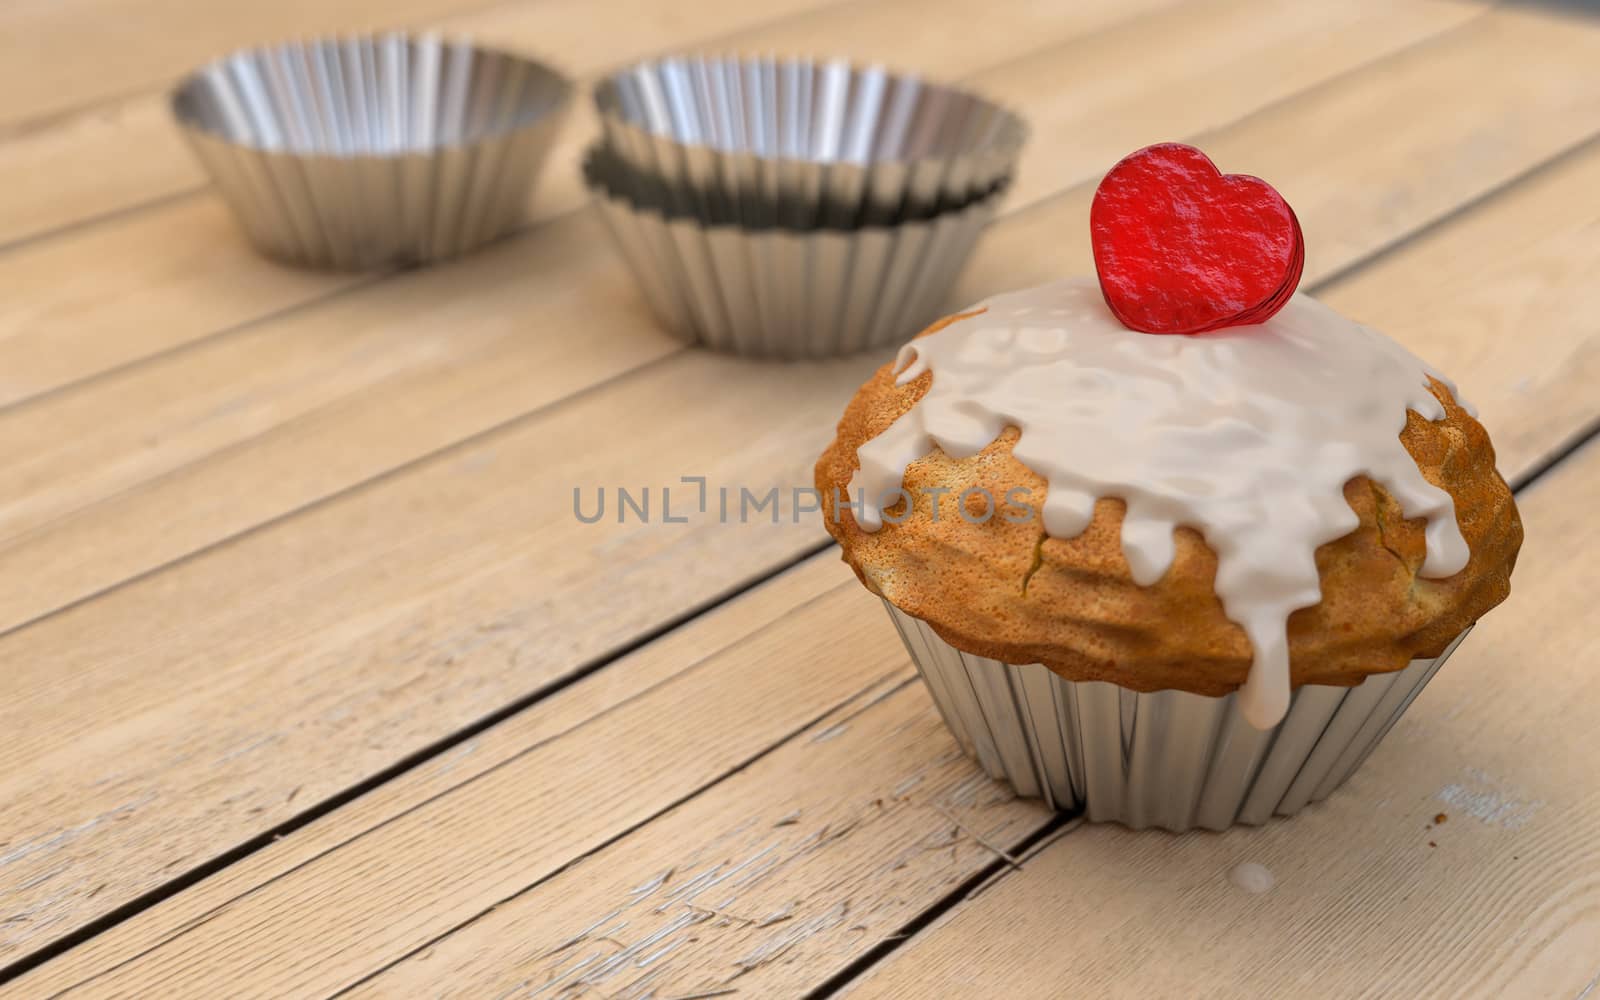 Love cupcake with a red heart for Valentines Day